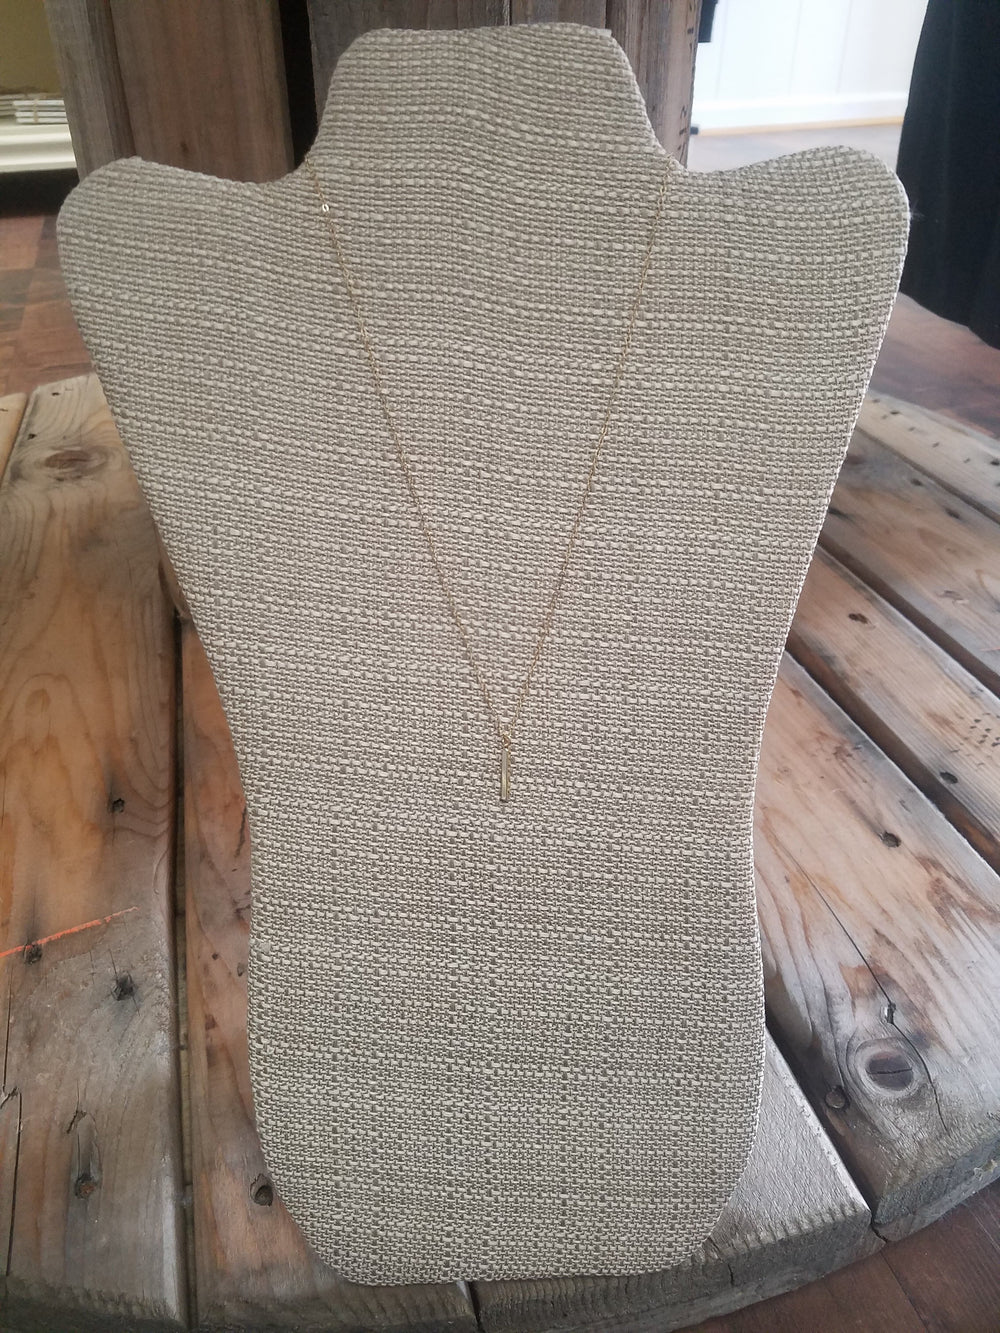 Necklace - 14 Karat Gold Filled Necklaces - Small Bar